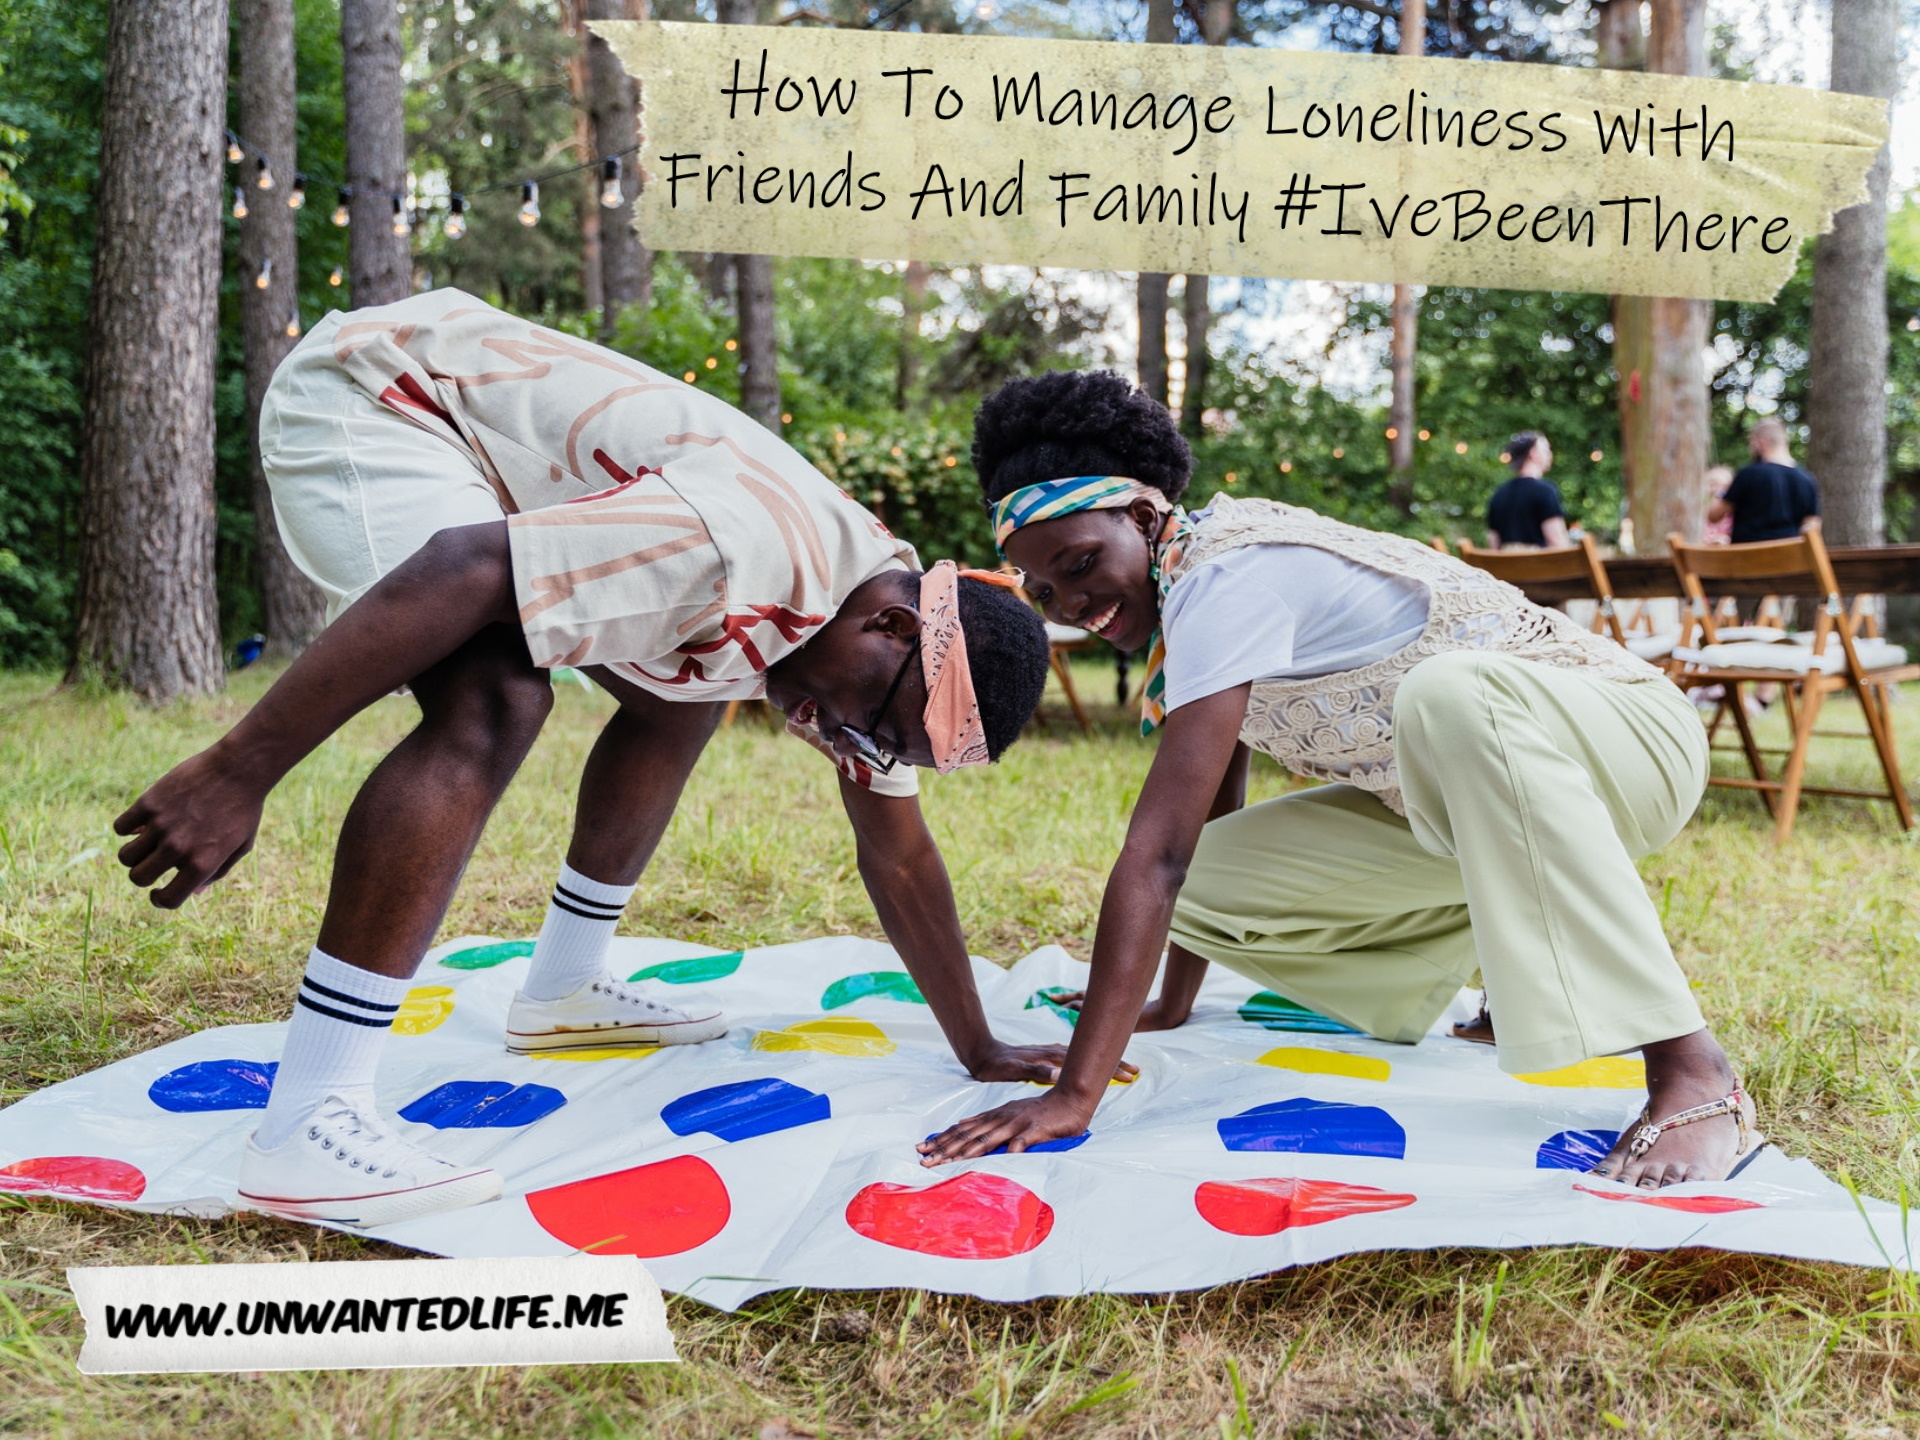 A Black man and woman playing twister outdoors in the park to represent the topic of the article - How To Manage Loneliness With Friends And Family #IveBeenThere